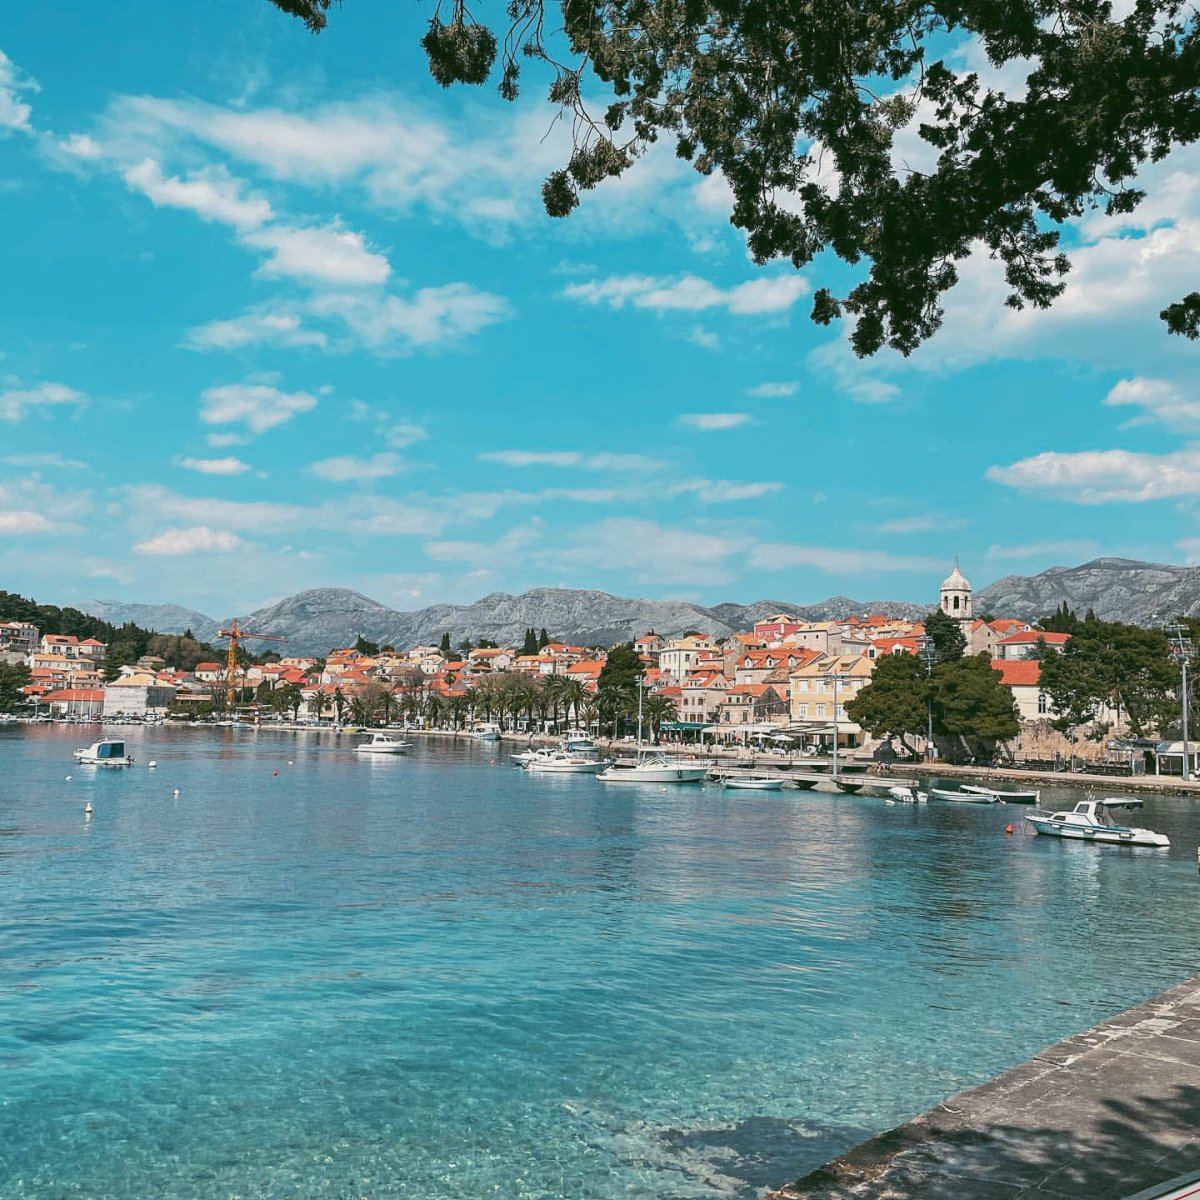 Where to Stay in Cavtat - best neighbourhoods to stay at while visiting Cavtat.